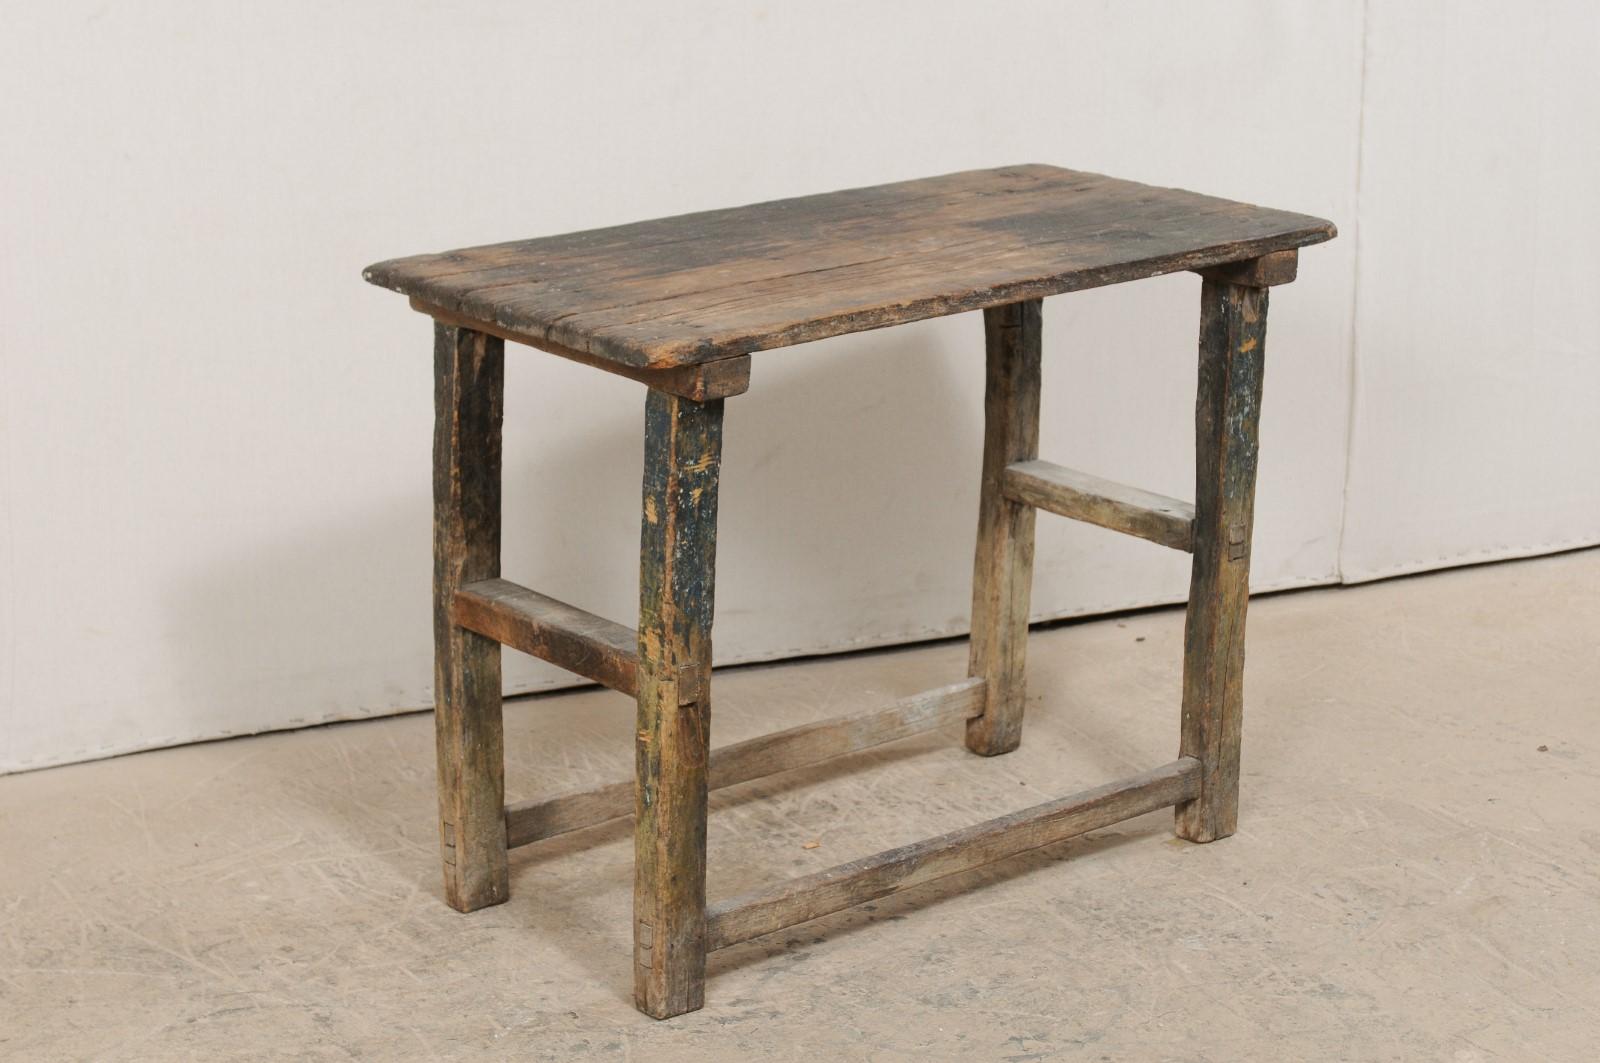 An Italian Primitive wooden occasional table from the 18th century. This smaller-sized antique table from Italy features a rectangular-shaped top, which is raised on four squared legs with stretchers between. This piece has a wonderful old patina